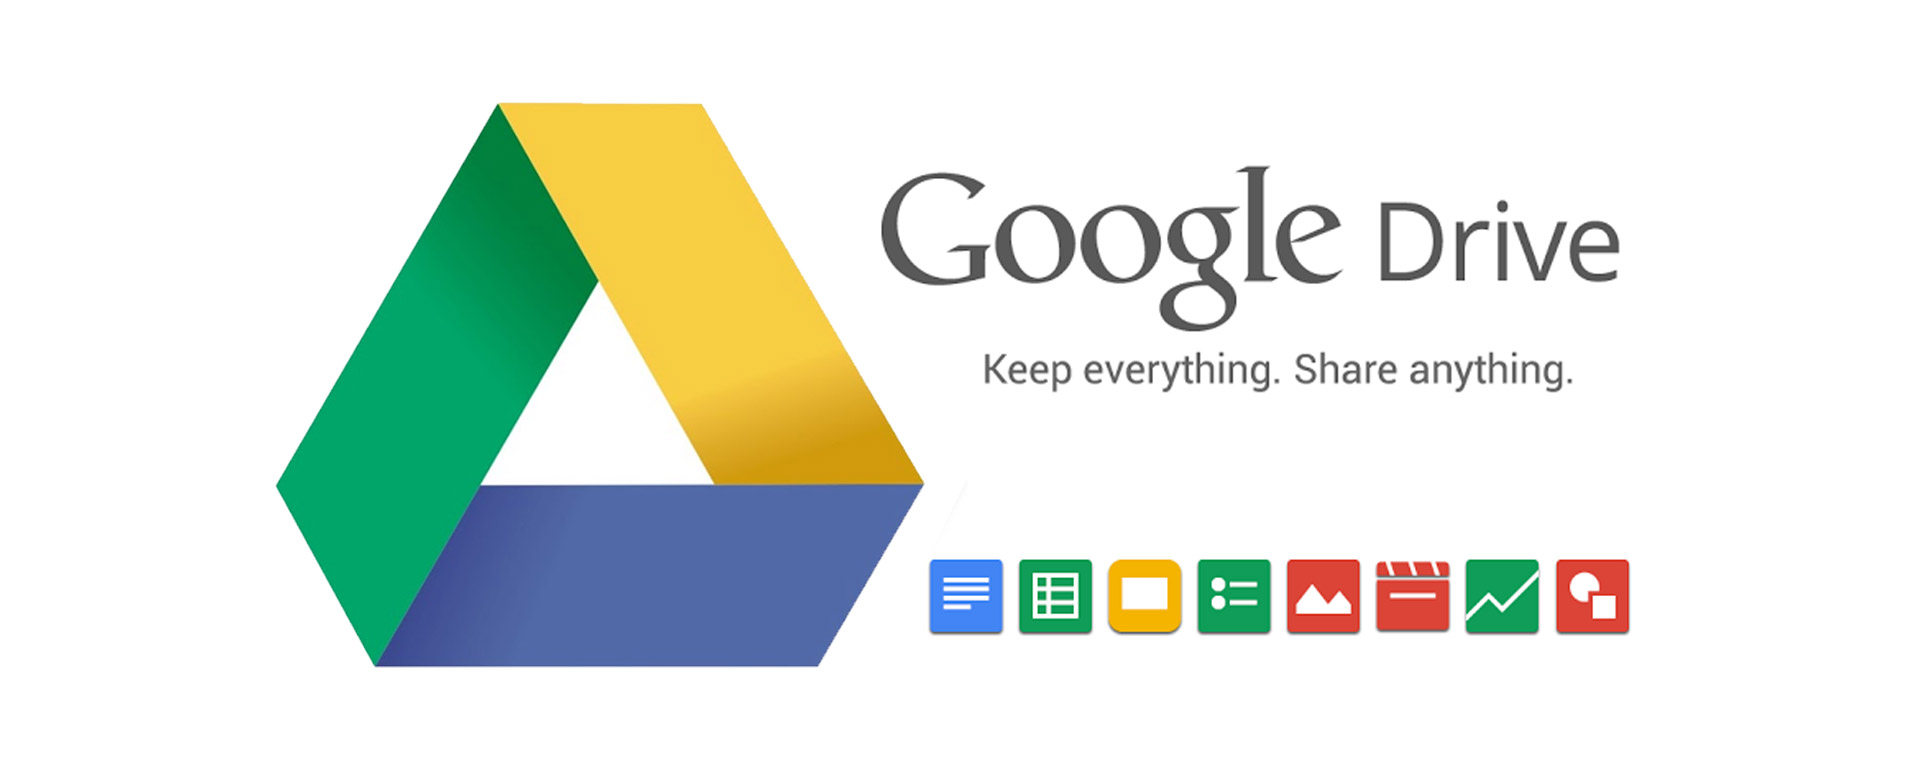 GoogleDrive apps for small business